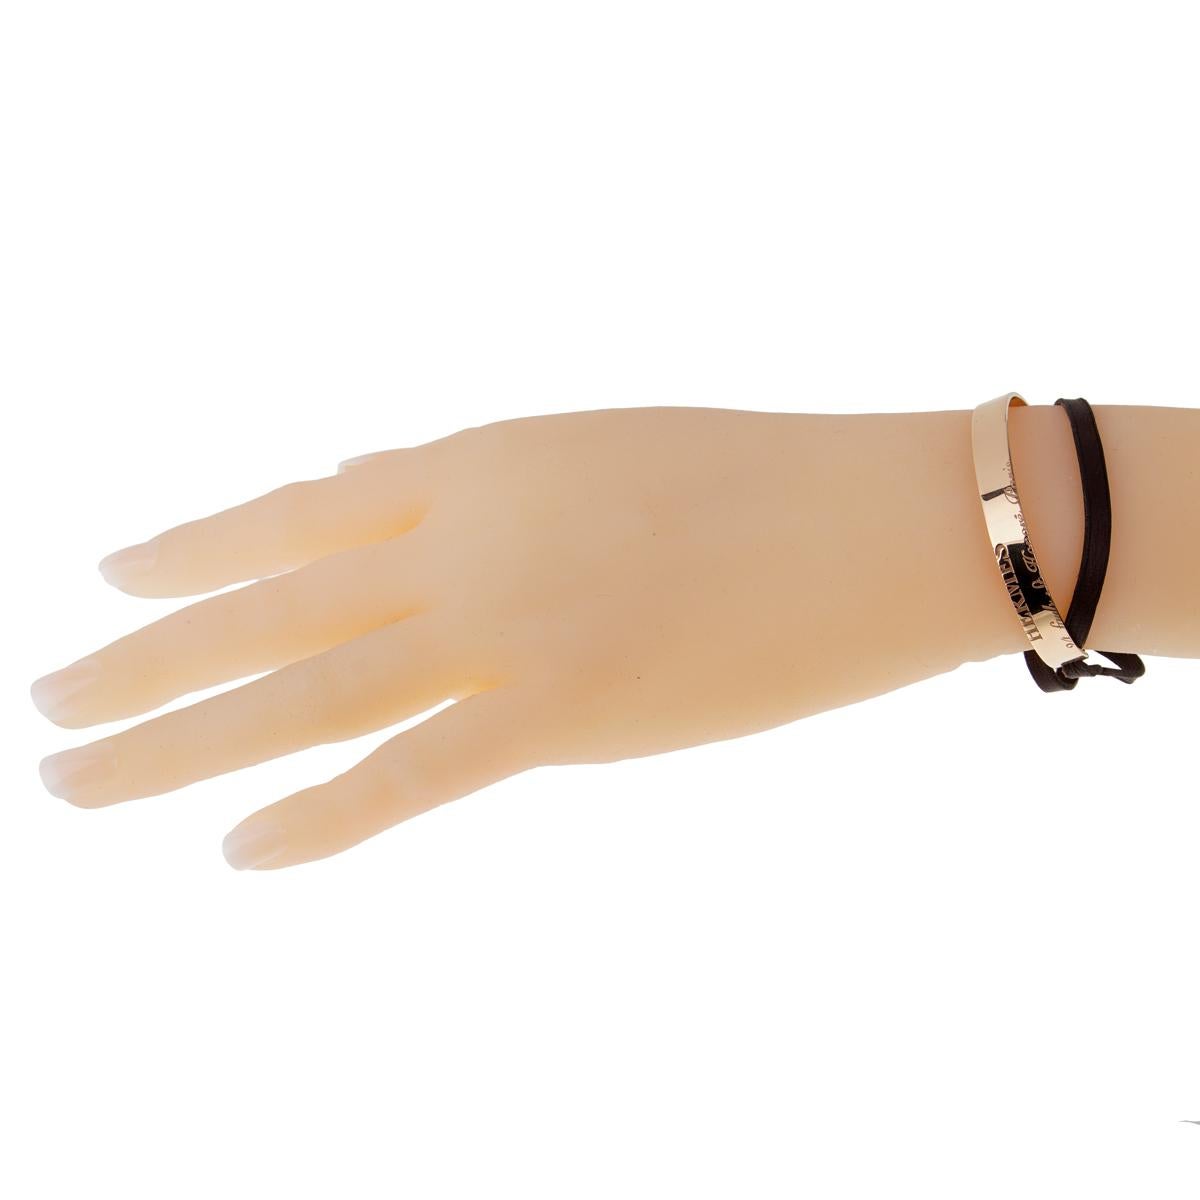 A gorgeous Rose Gold Bangle bracelet from Hermes features engravings of the Hermes logo and chic address in Paris. Made in solid, smooth 18k rose gold, the oval open cuff can be worn alone, or embellished with a chic skinny black leather cord that